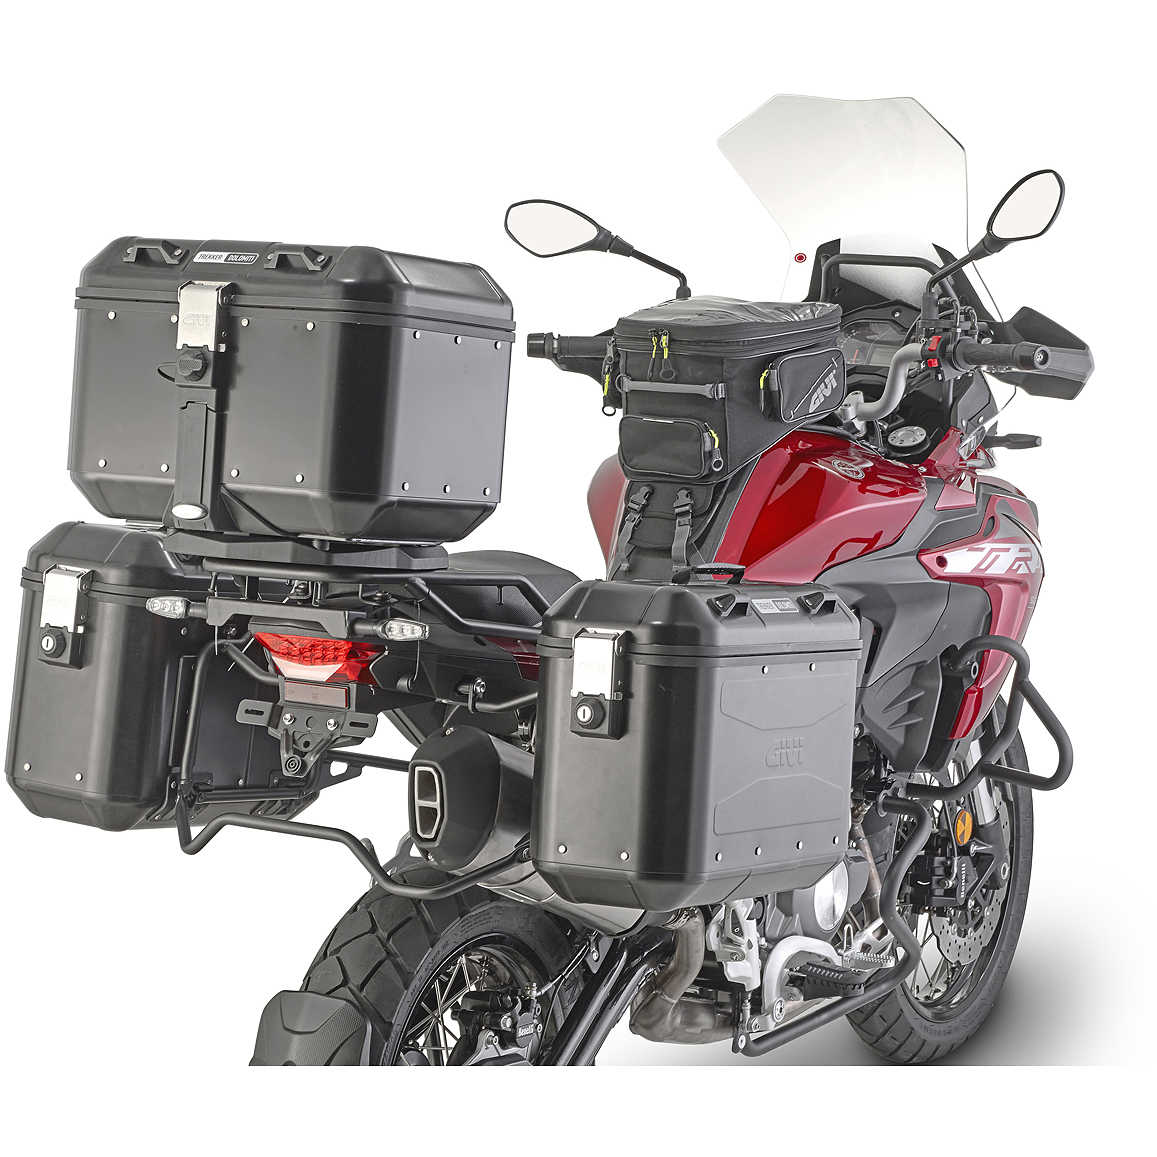 Support valises latérales Shad 4P System Cf Moto 800MT - Supports - Valises  latérales - Bagagerie